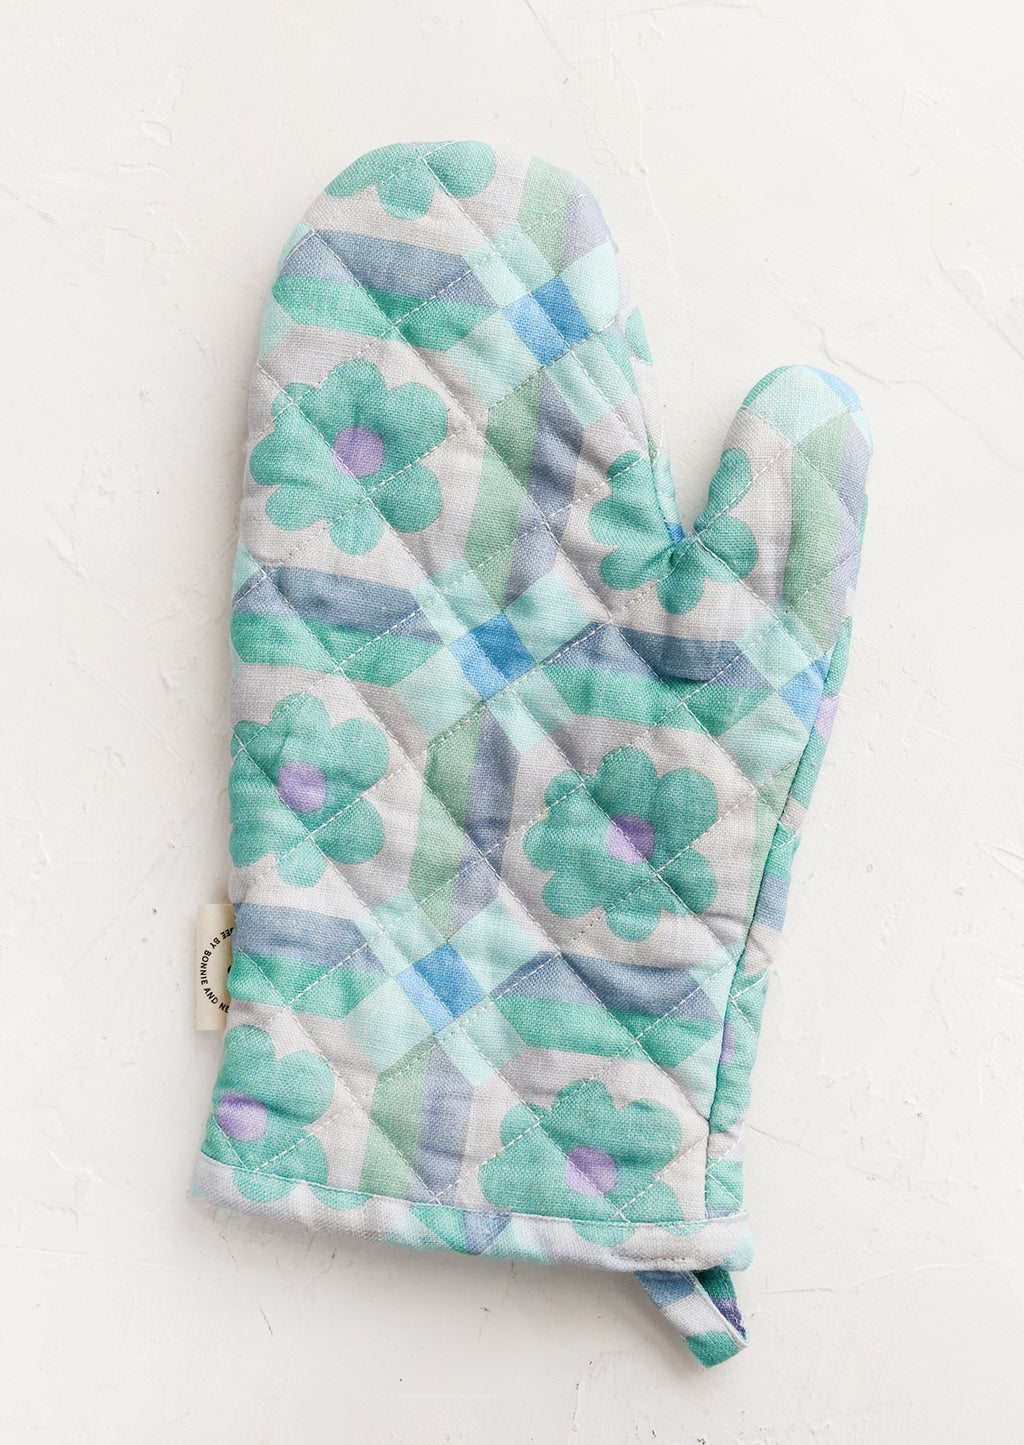 Cool Multi: An oven mitt with retro floral pattern in aqua and lavender.